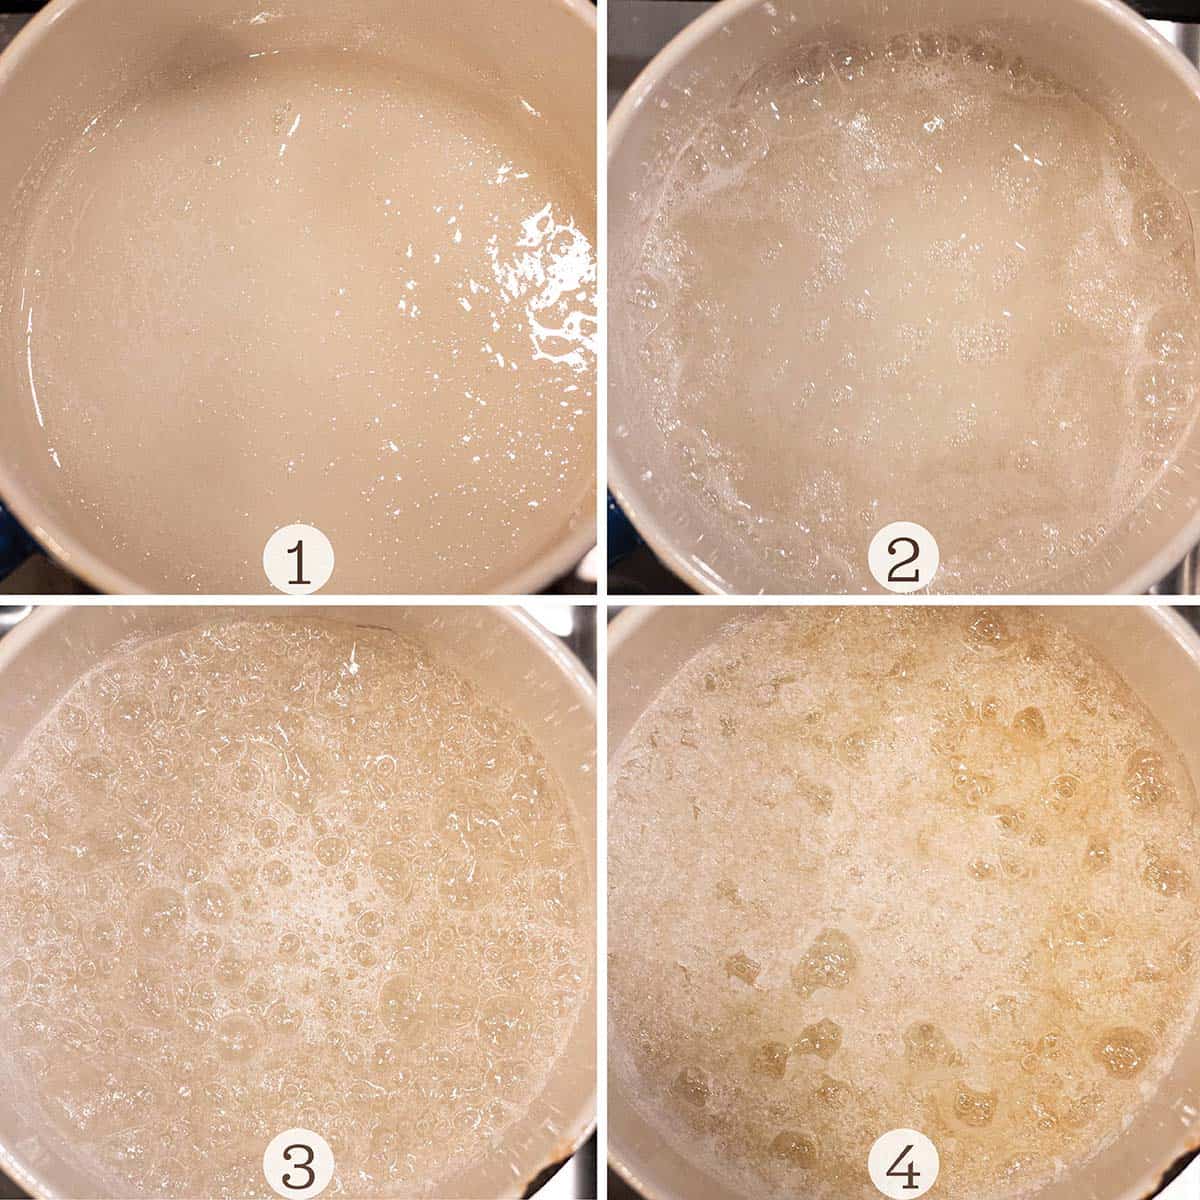 Four images of caramel sauce being made. 